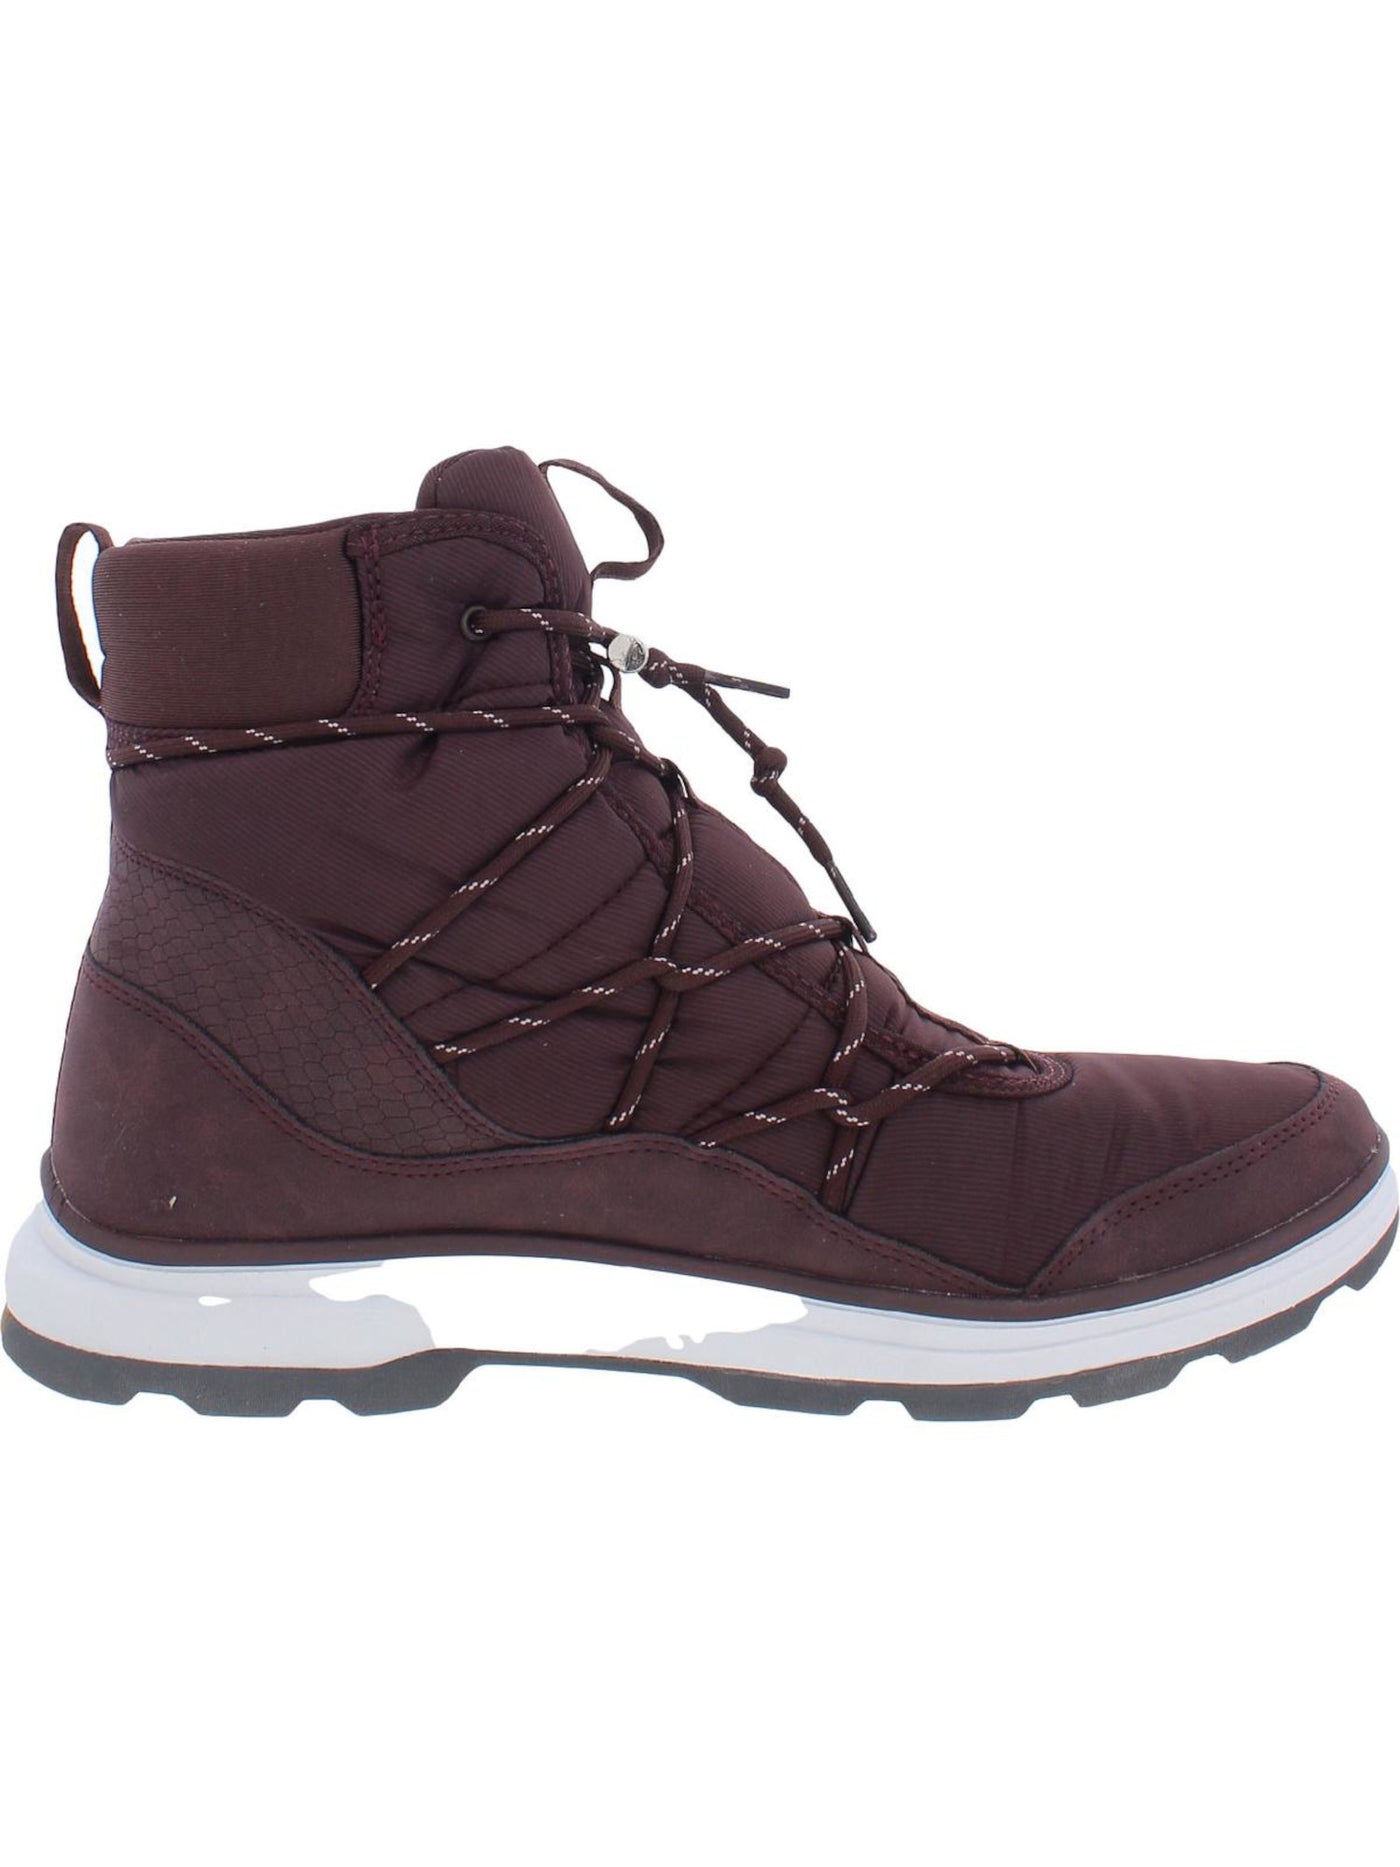 RYKA Womens Burgundy Water Resistant Removable Insole Brae Round Toe Wedge Lace-Up Snow Boots 9 M